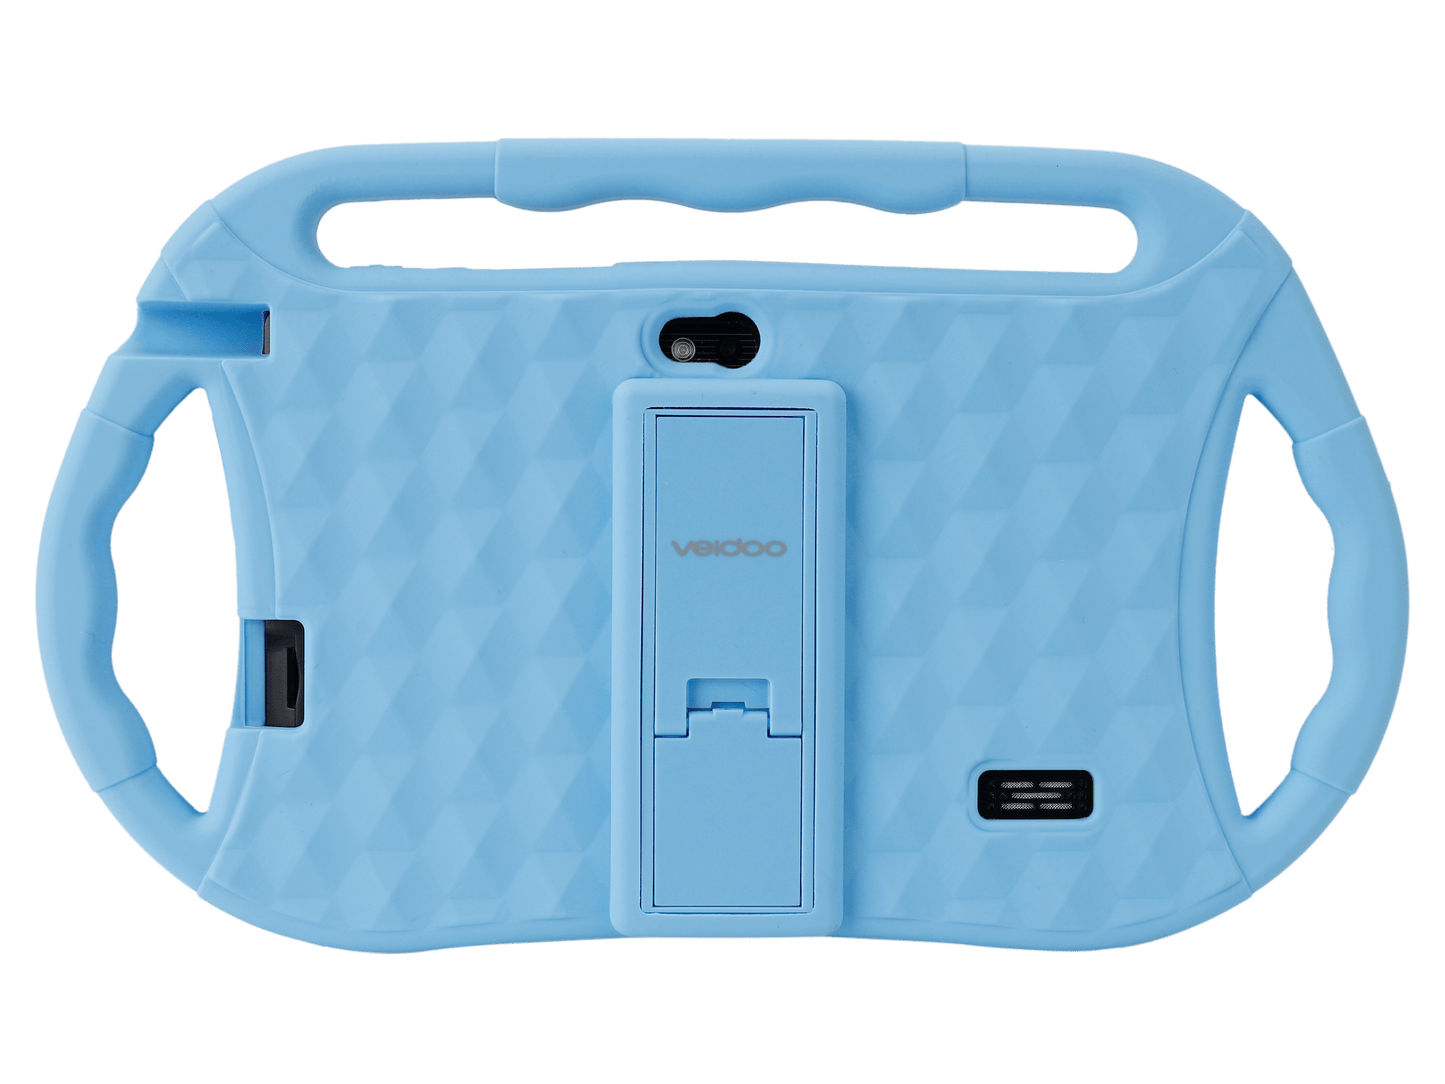 Veidoo 7” Android Tablet with protective case - Blue - SuperHub